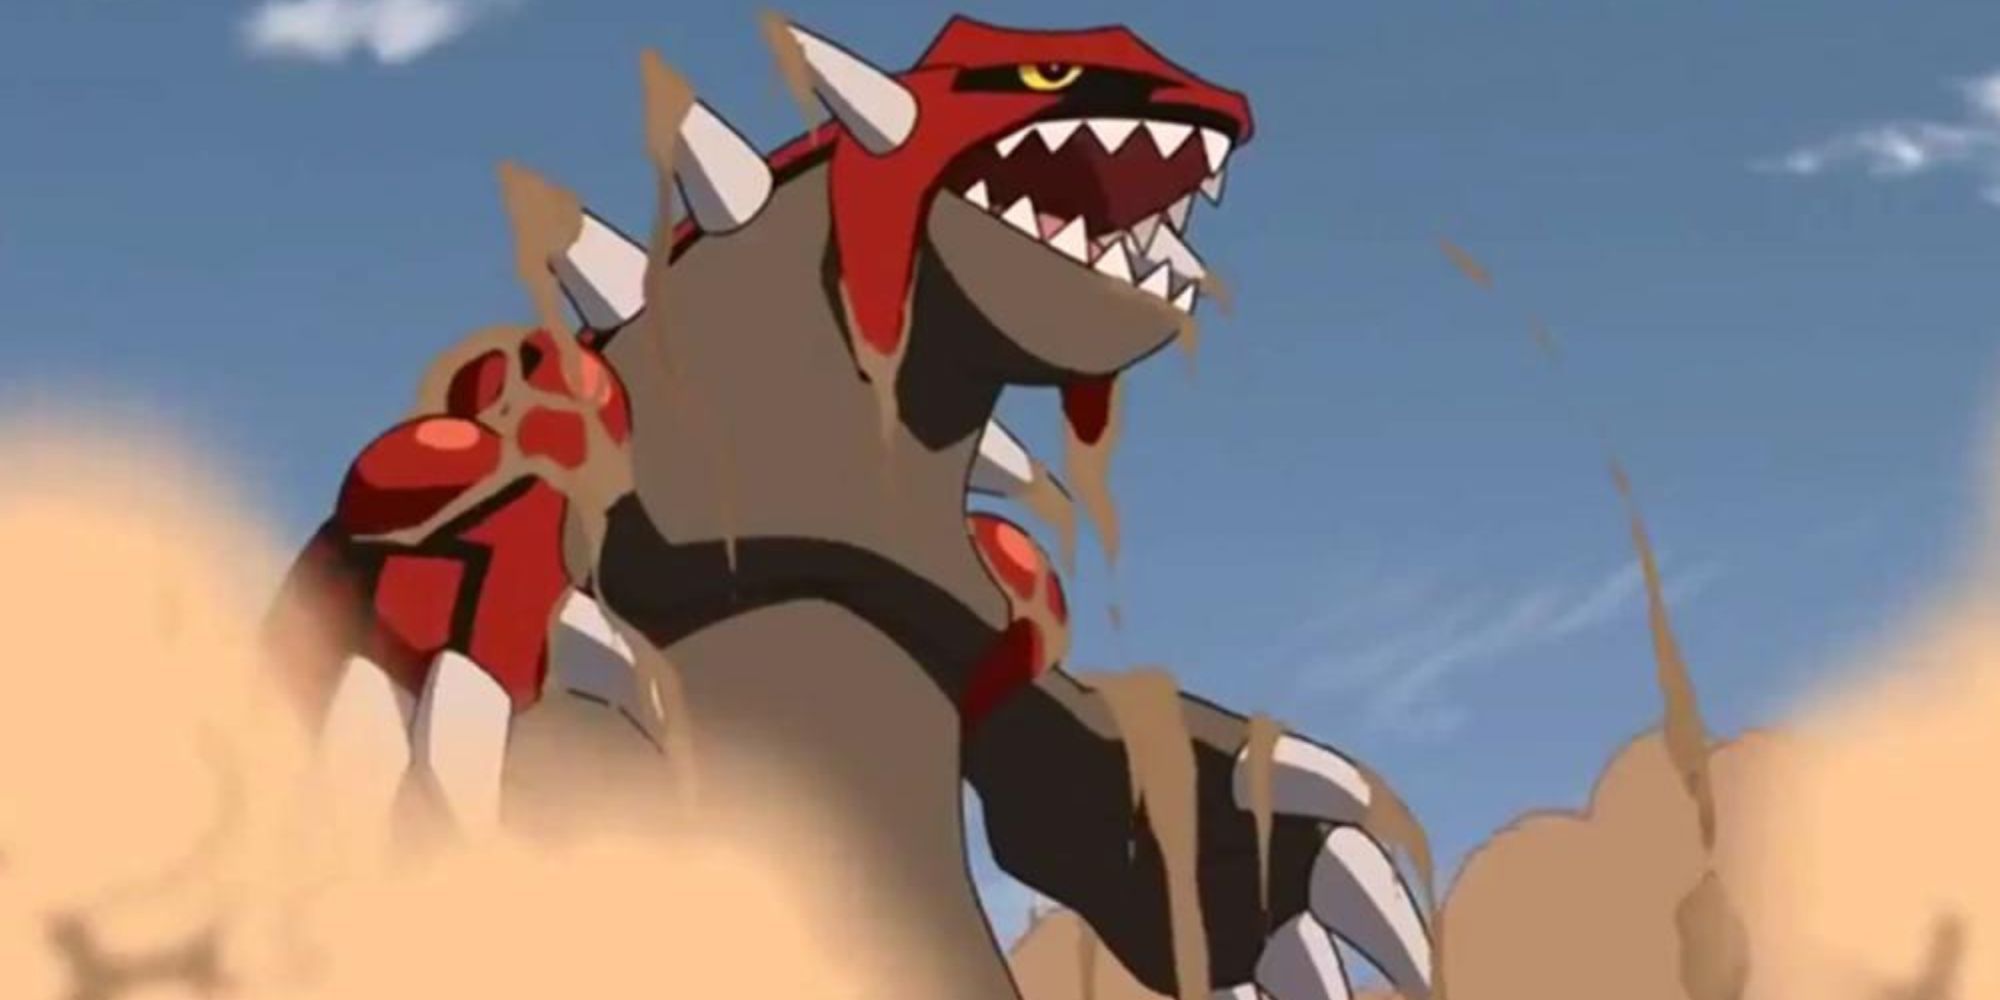 Groudon raises from the ground covered in sand